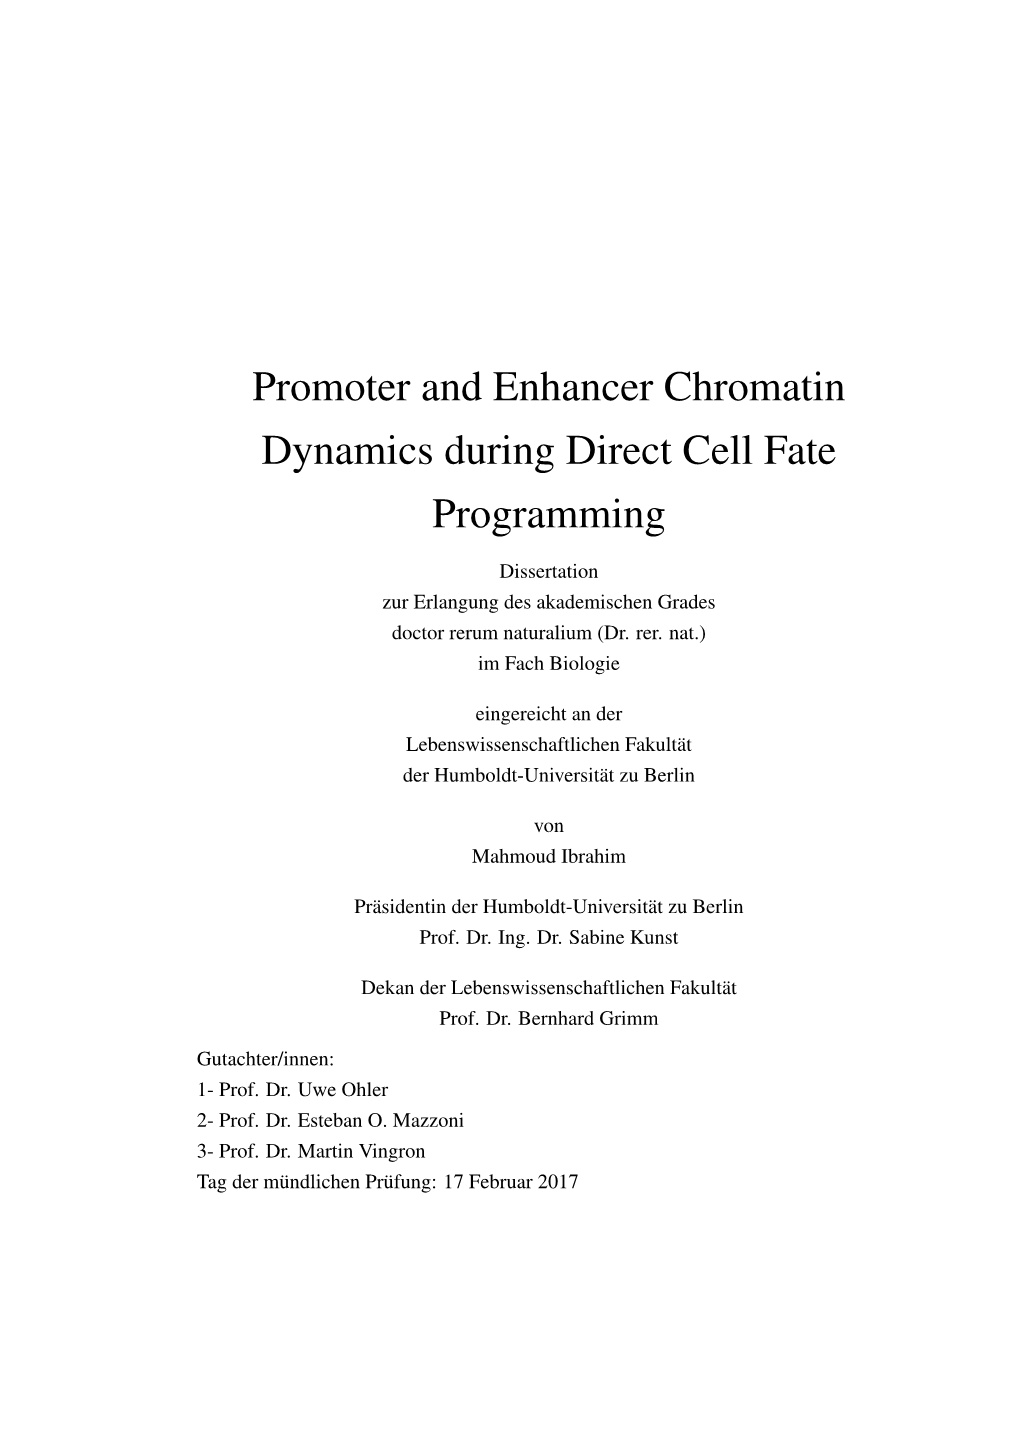 Promoter and Enhancer Chromatin Dynamics During Direct Cell Fate Programming